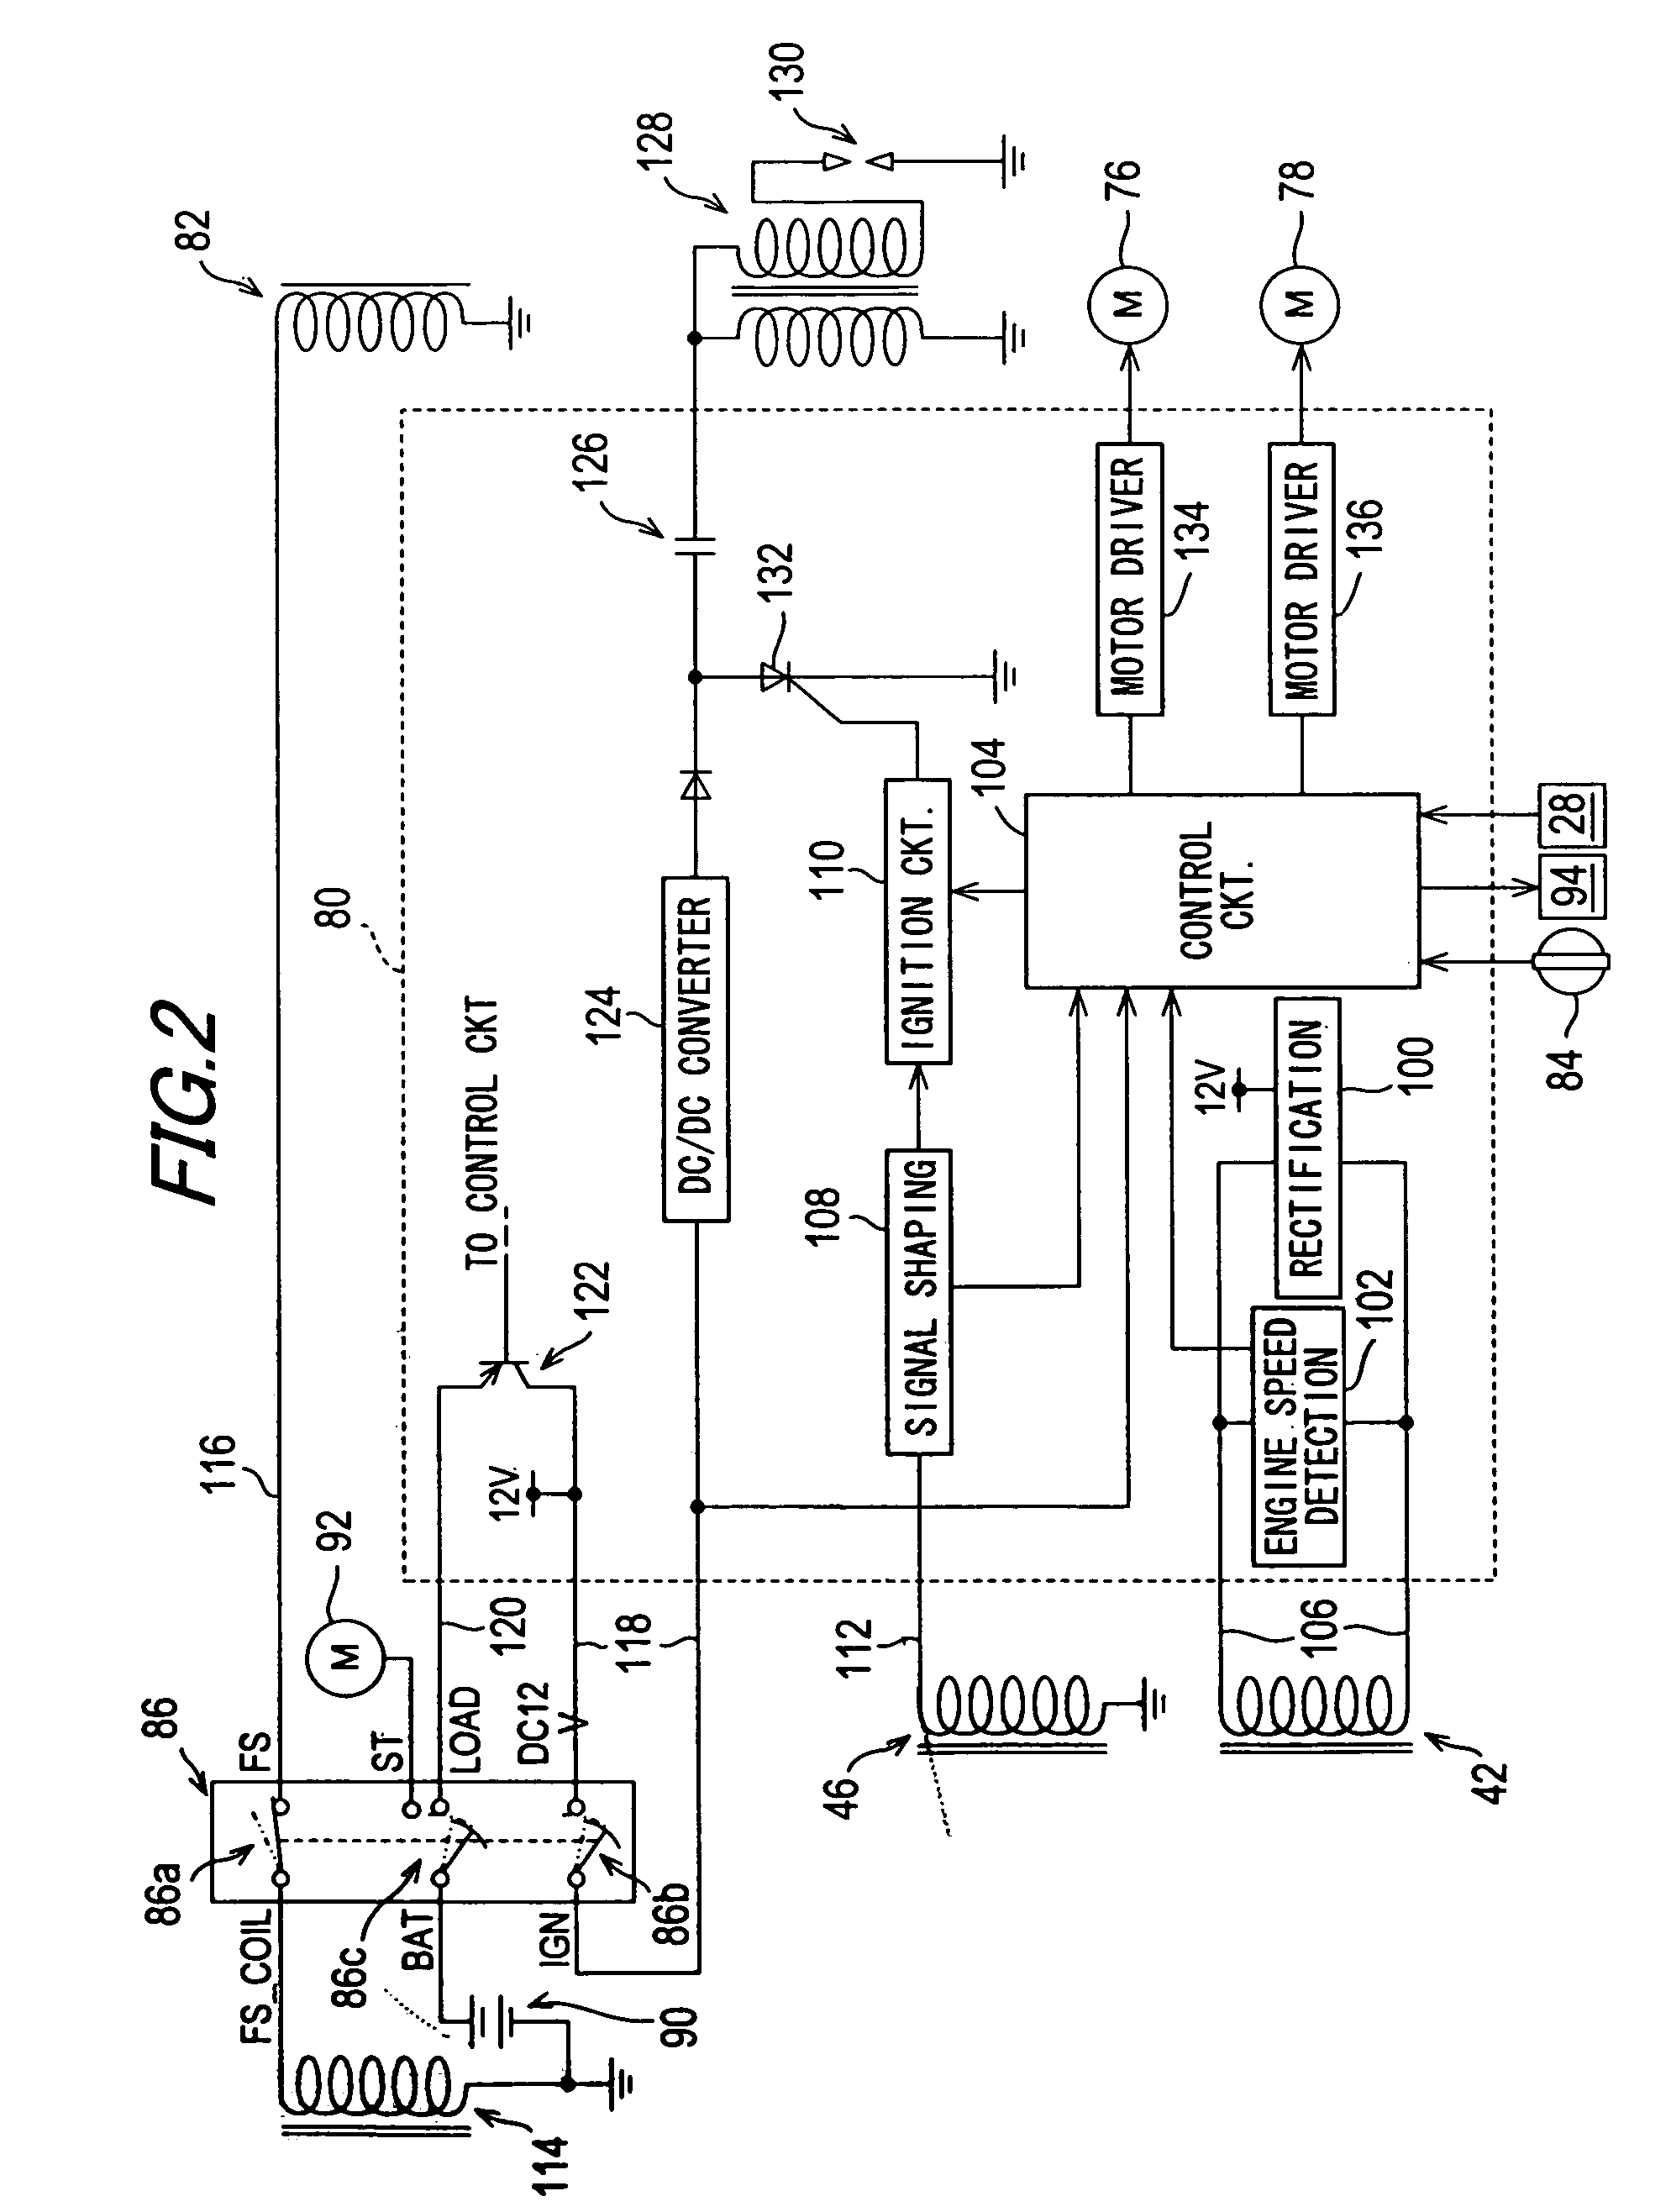 Coil failure detection system for general-purpose engine